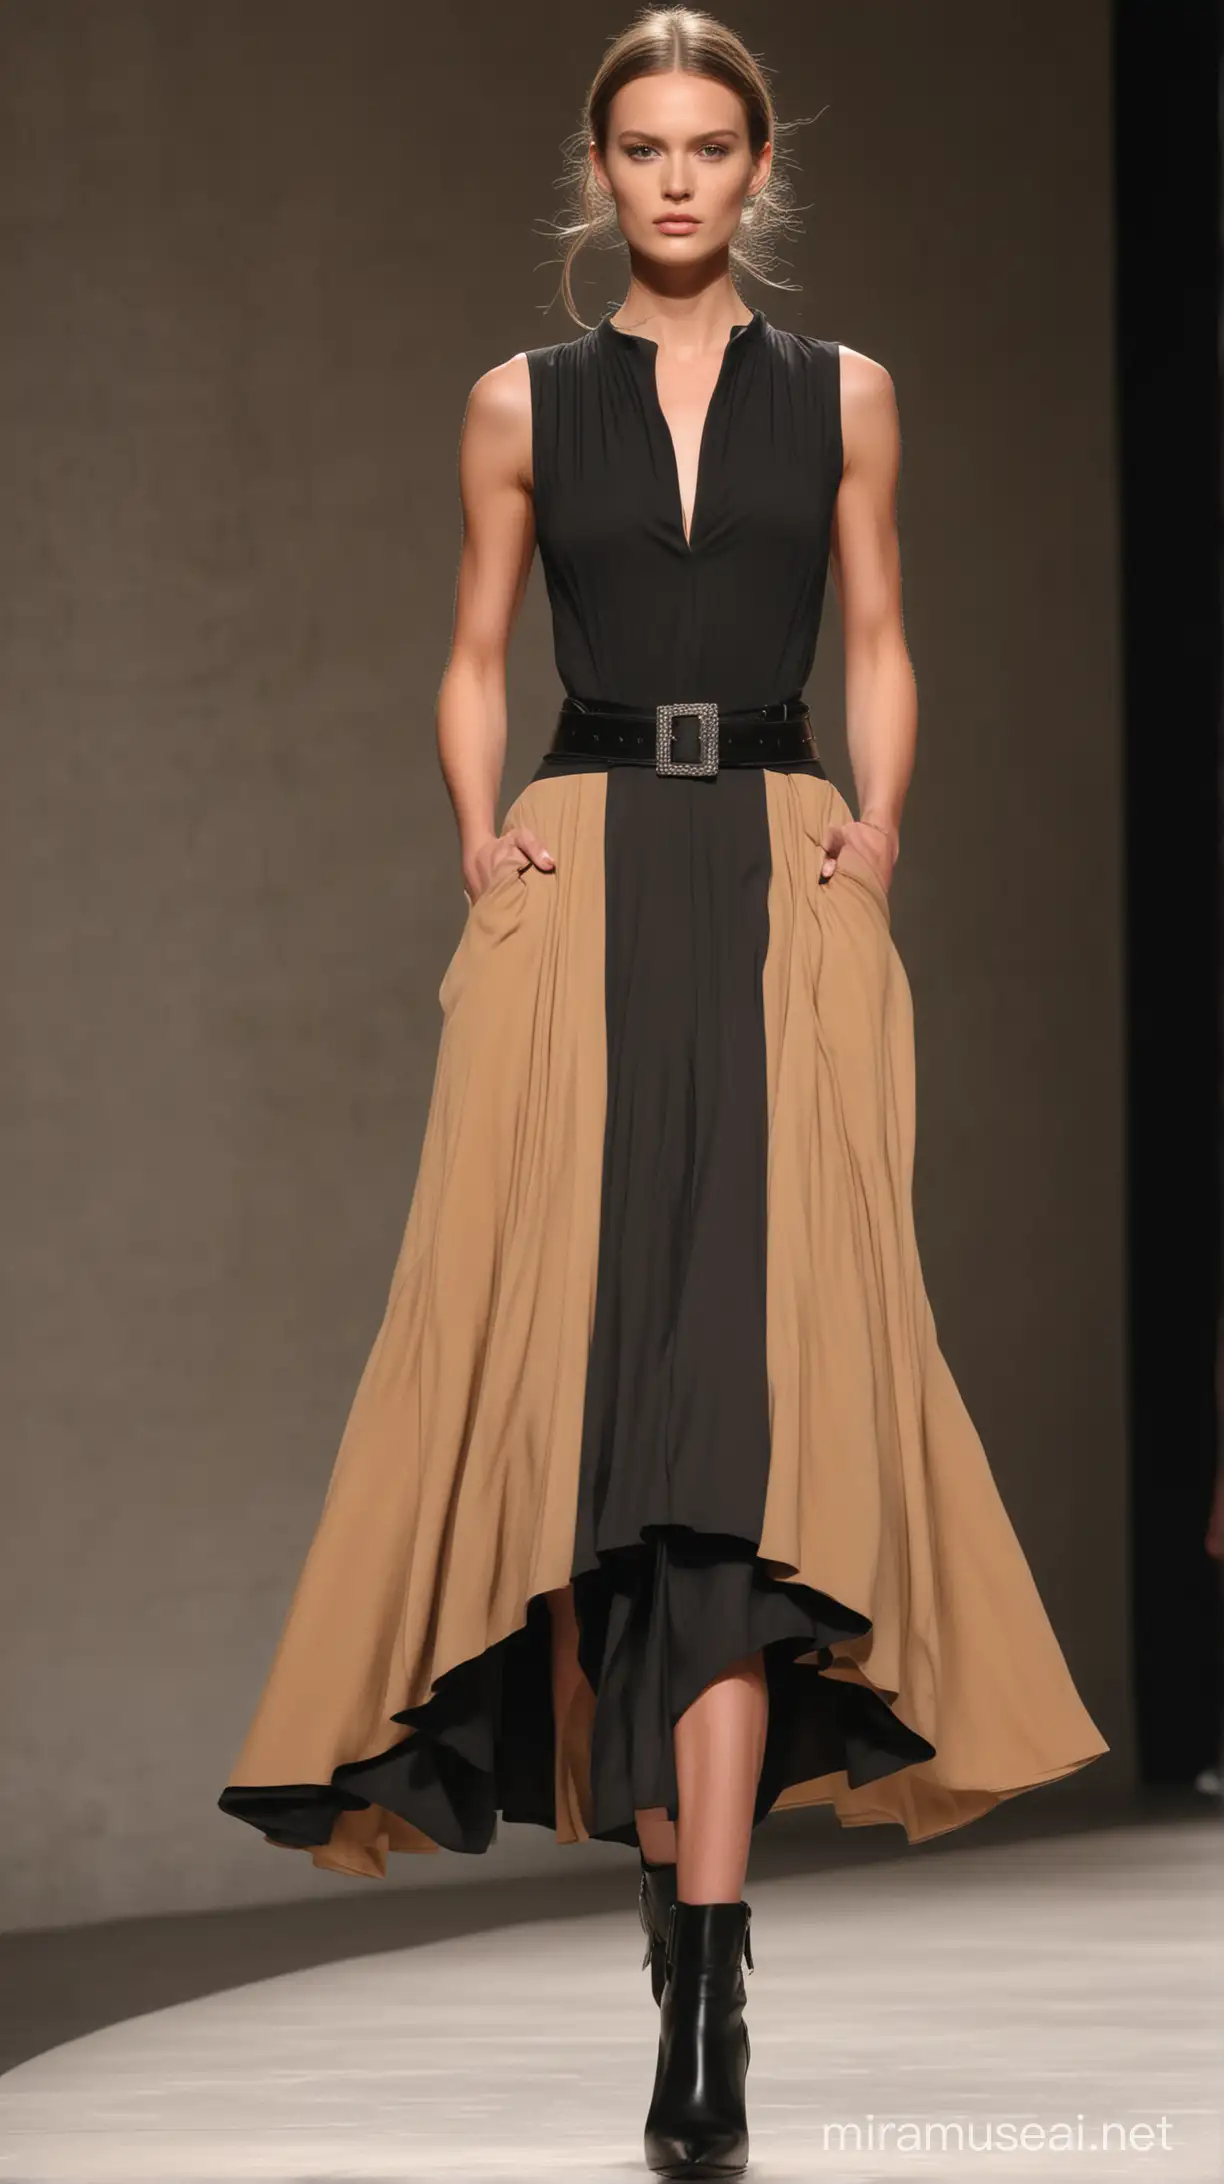 Montelago Fashion Show Supermodel in Sleeveless Camel and Charcoal Dress